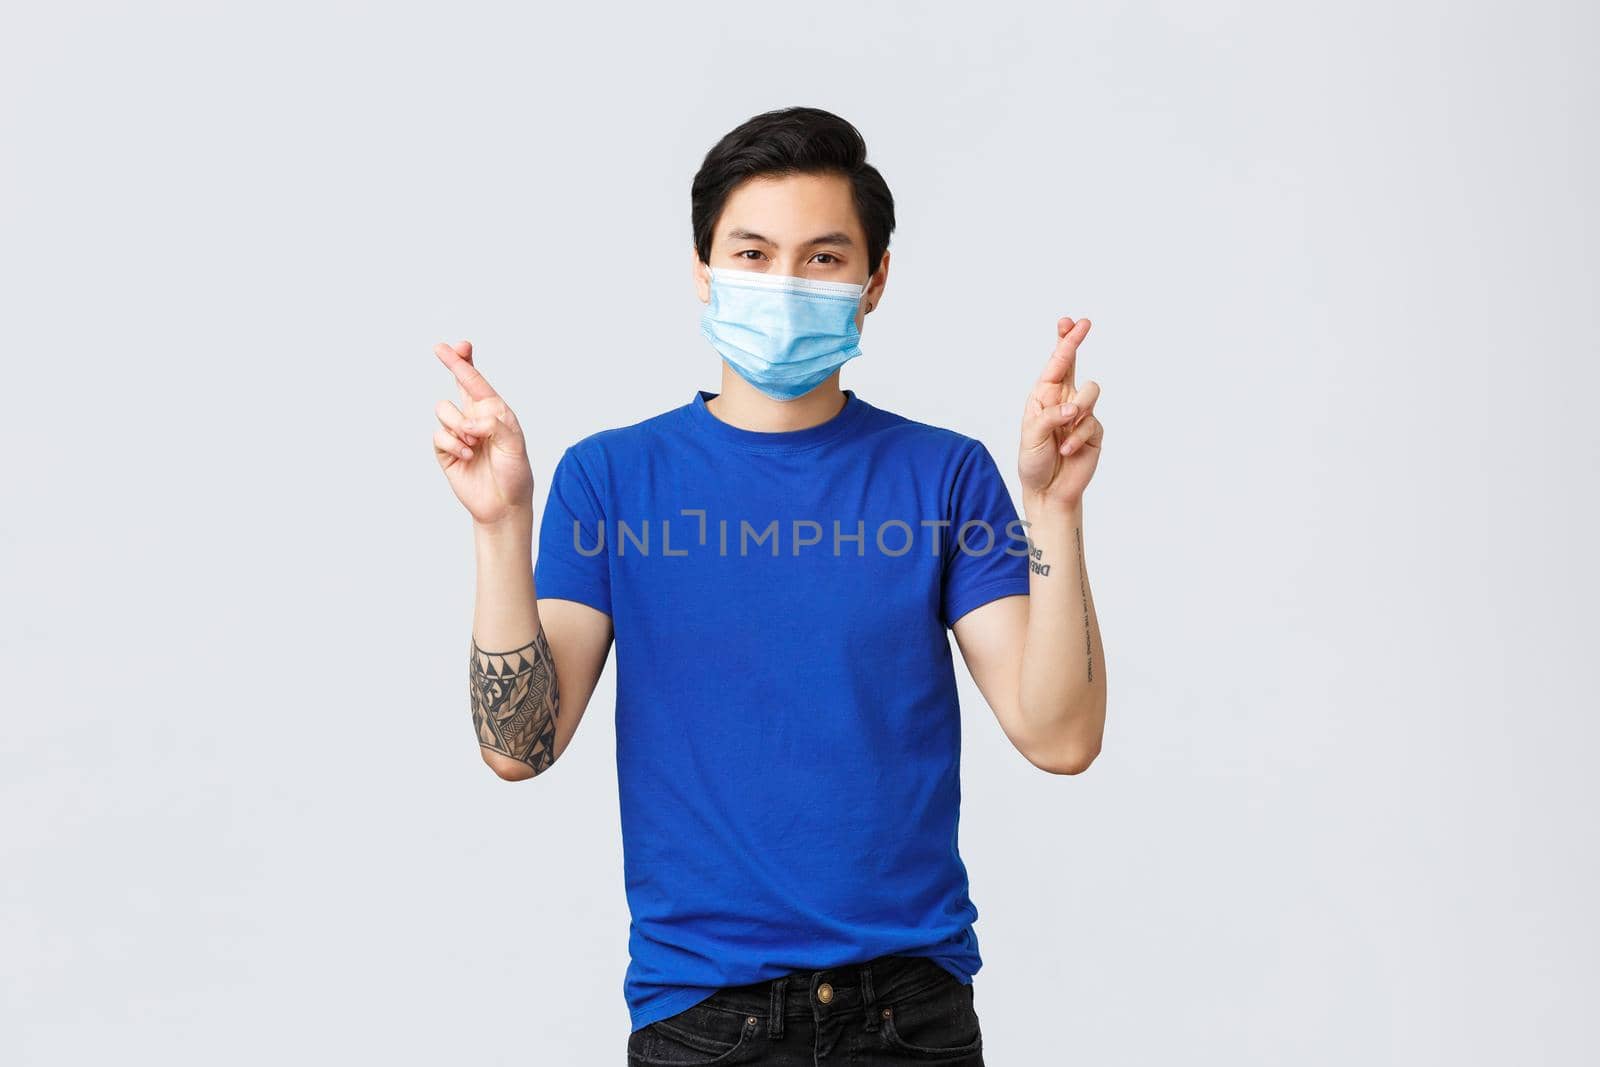 Different emotions, social distancing, self-quarantine on covid-19 and lifestyle concept. Determined hopeful asian man praying, cross fingers good luck, wearing medical mask.